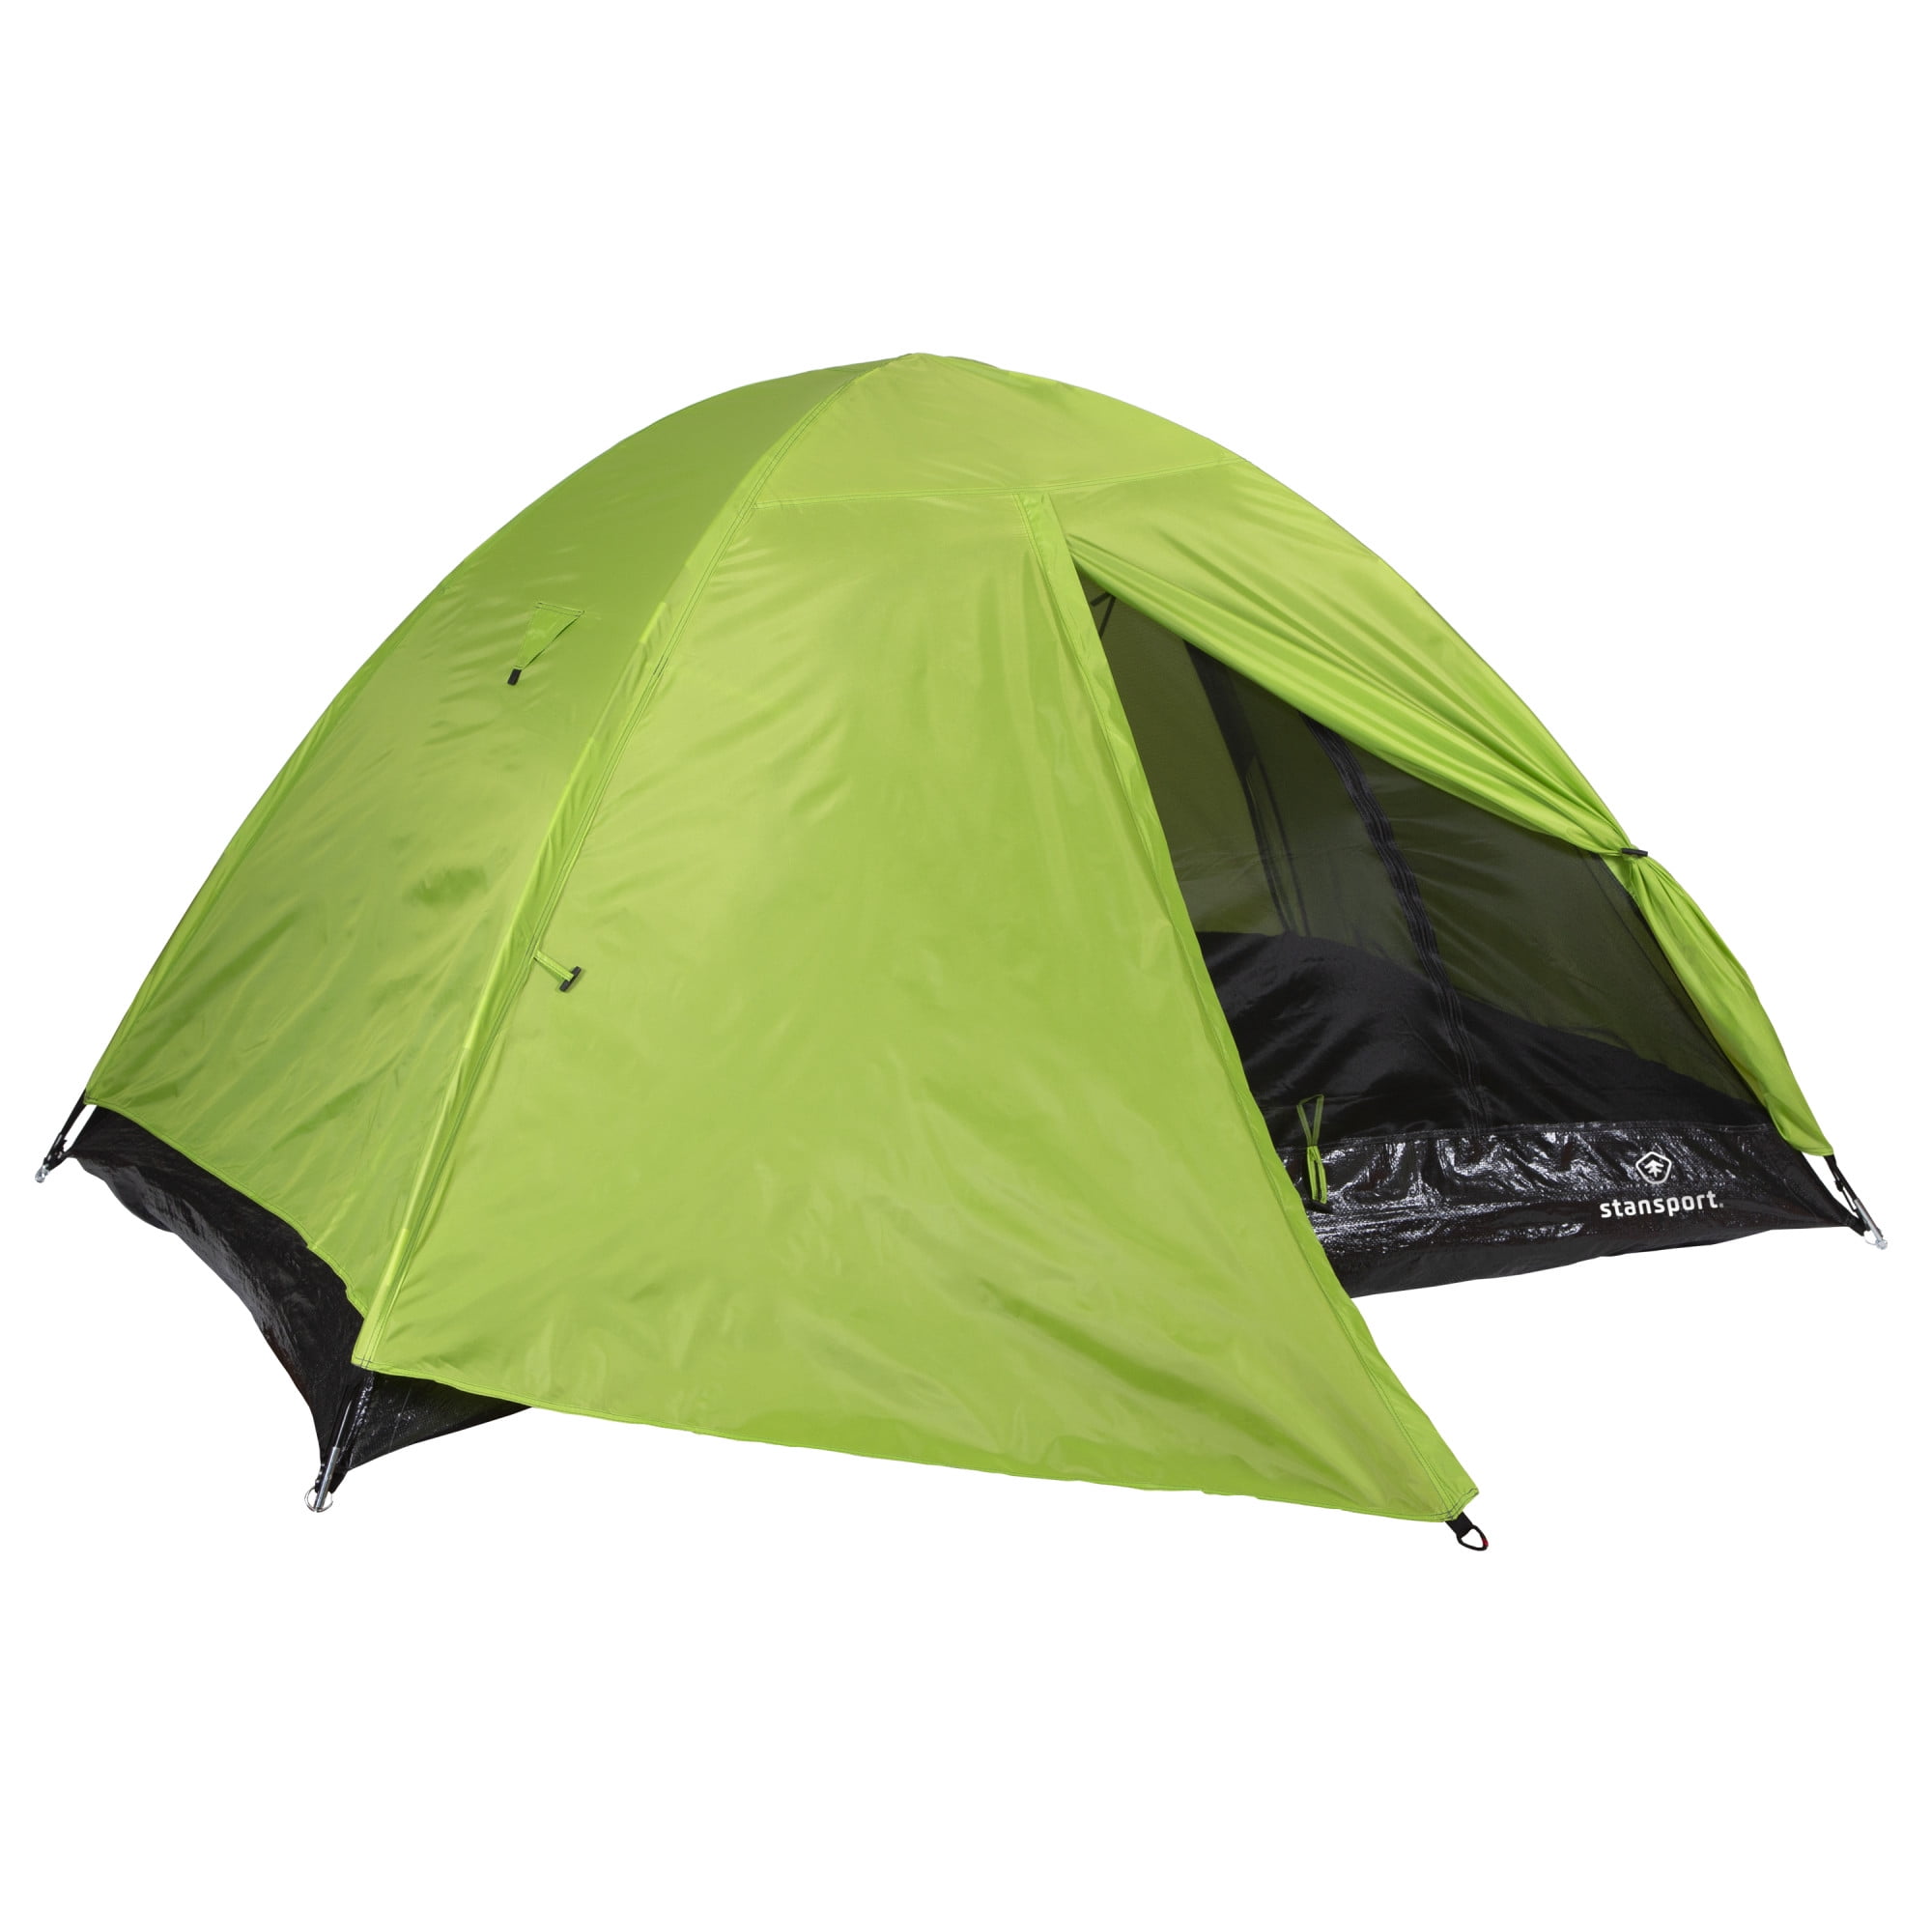 Camping,Outdoors Orange 3OWL Everglades 5-Person Tent Perfect for Hiking